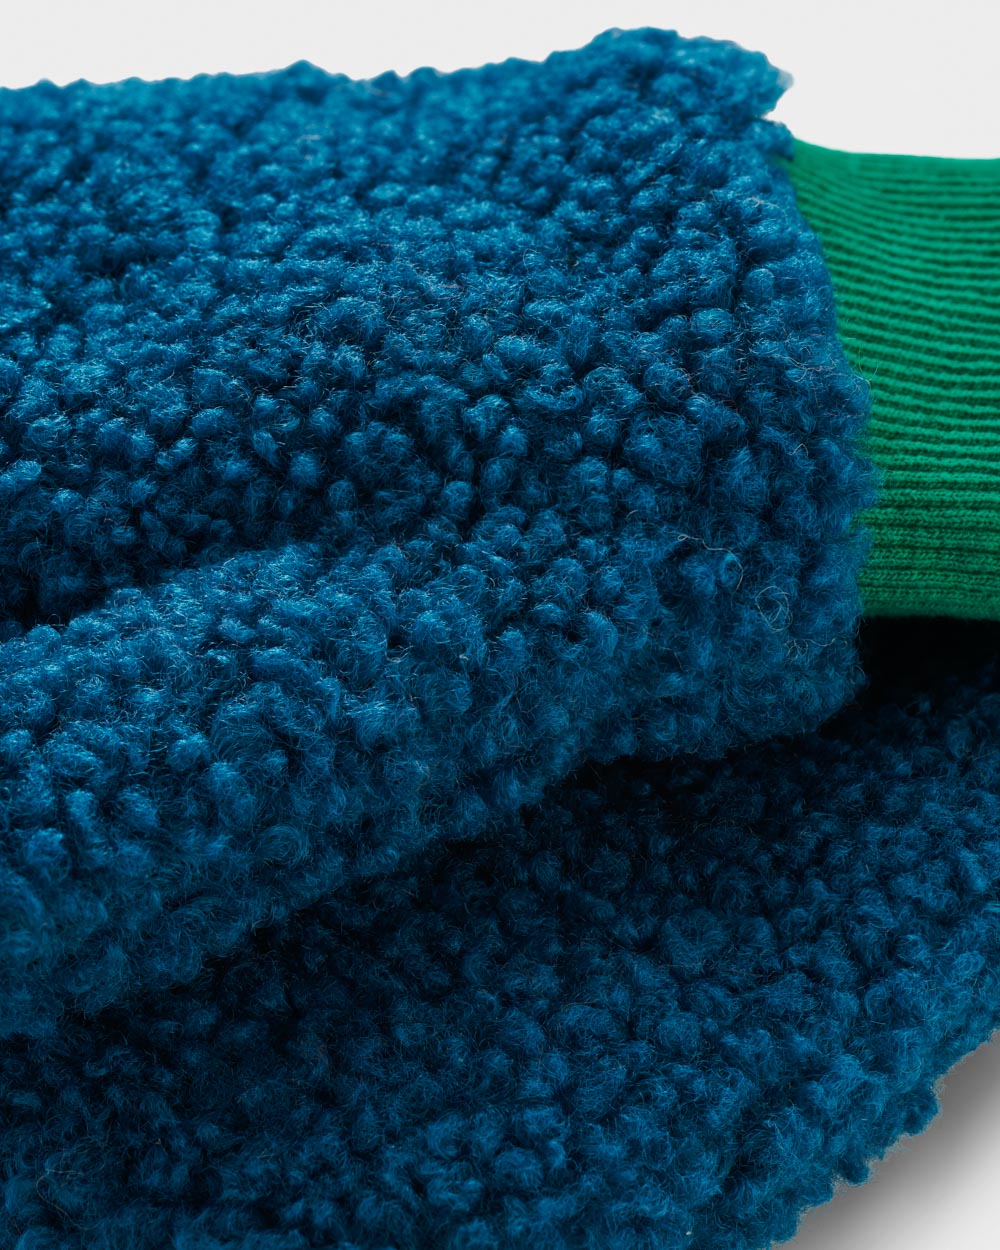 Blue borg mittens with contrasting green cuff made from recycled materials. 